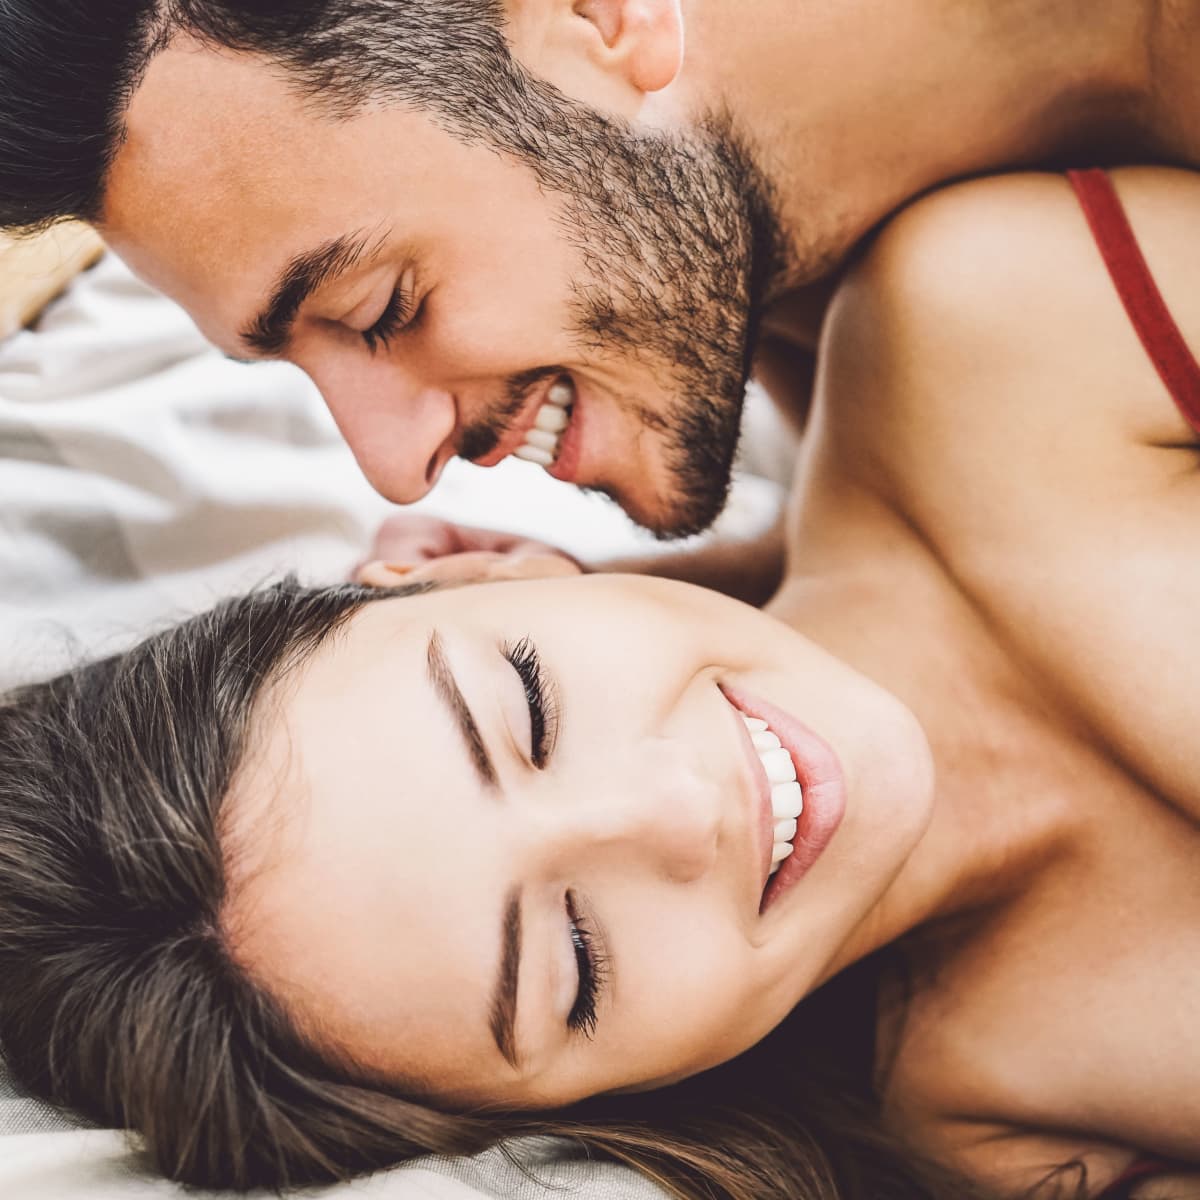 7 Secrets to Make Her Want You More photo